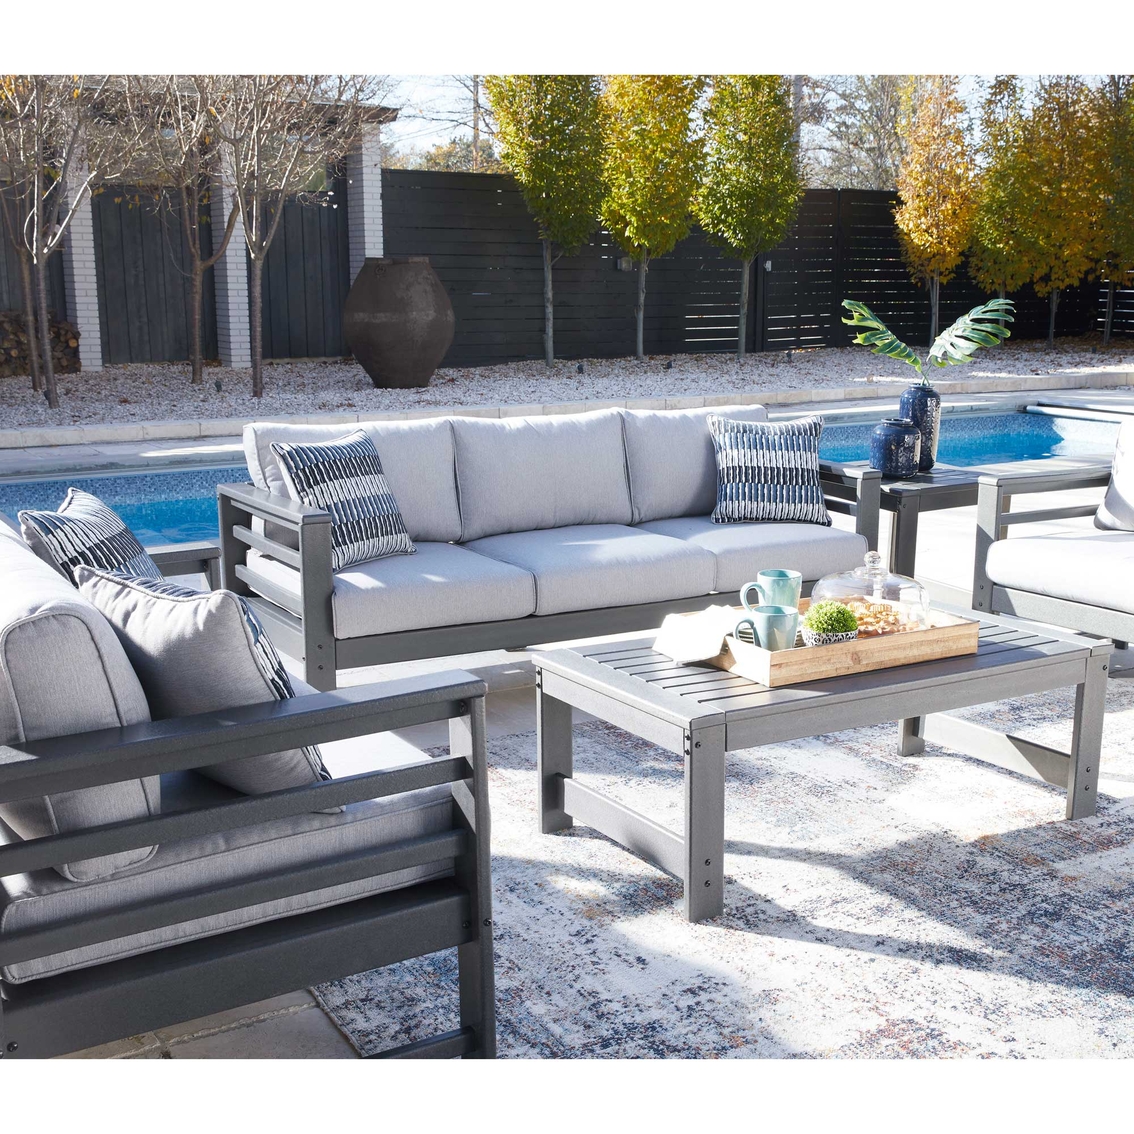 Signature Design by Ashley Amora Collection Outdoor 6 pc. Set - Image 8 of 10